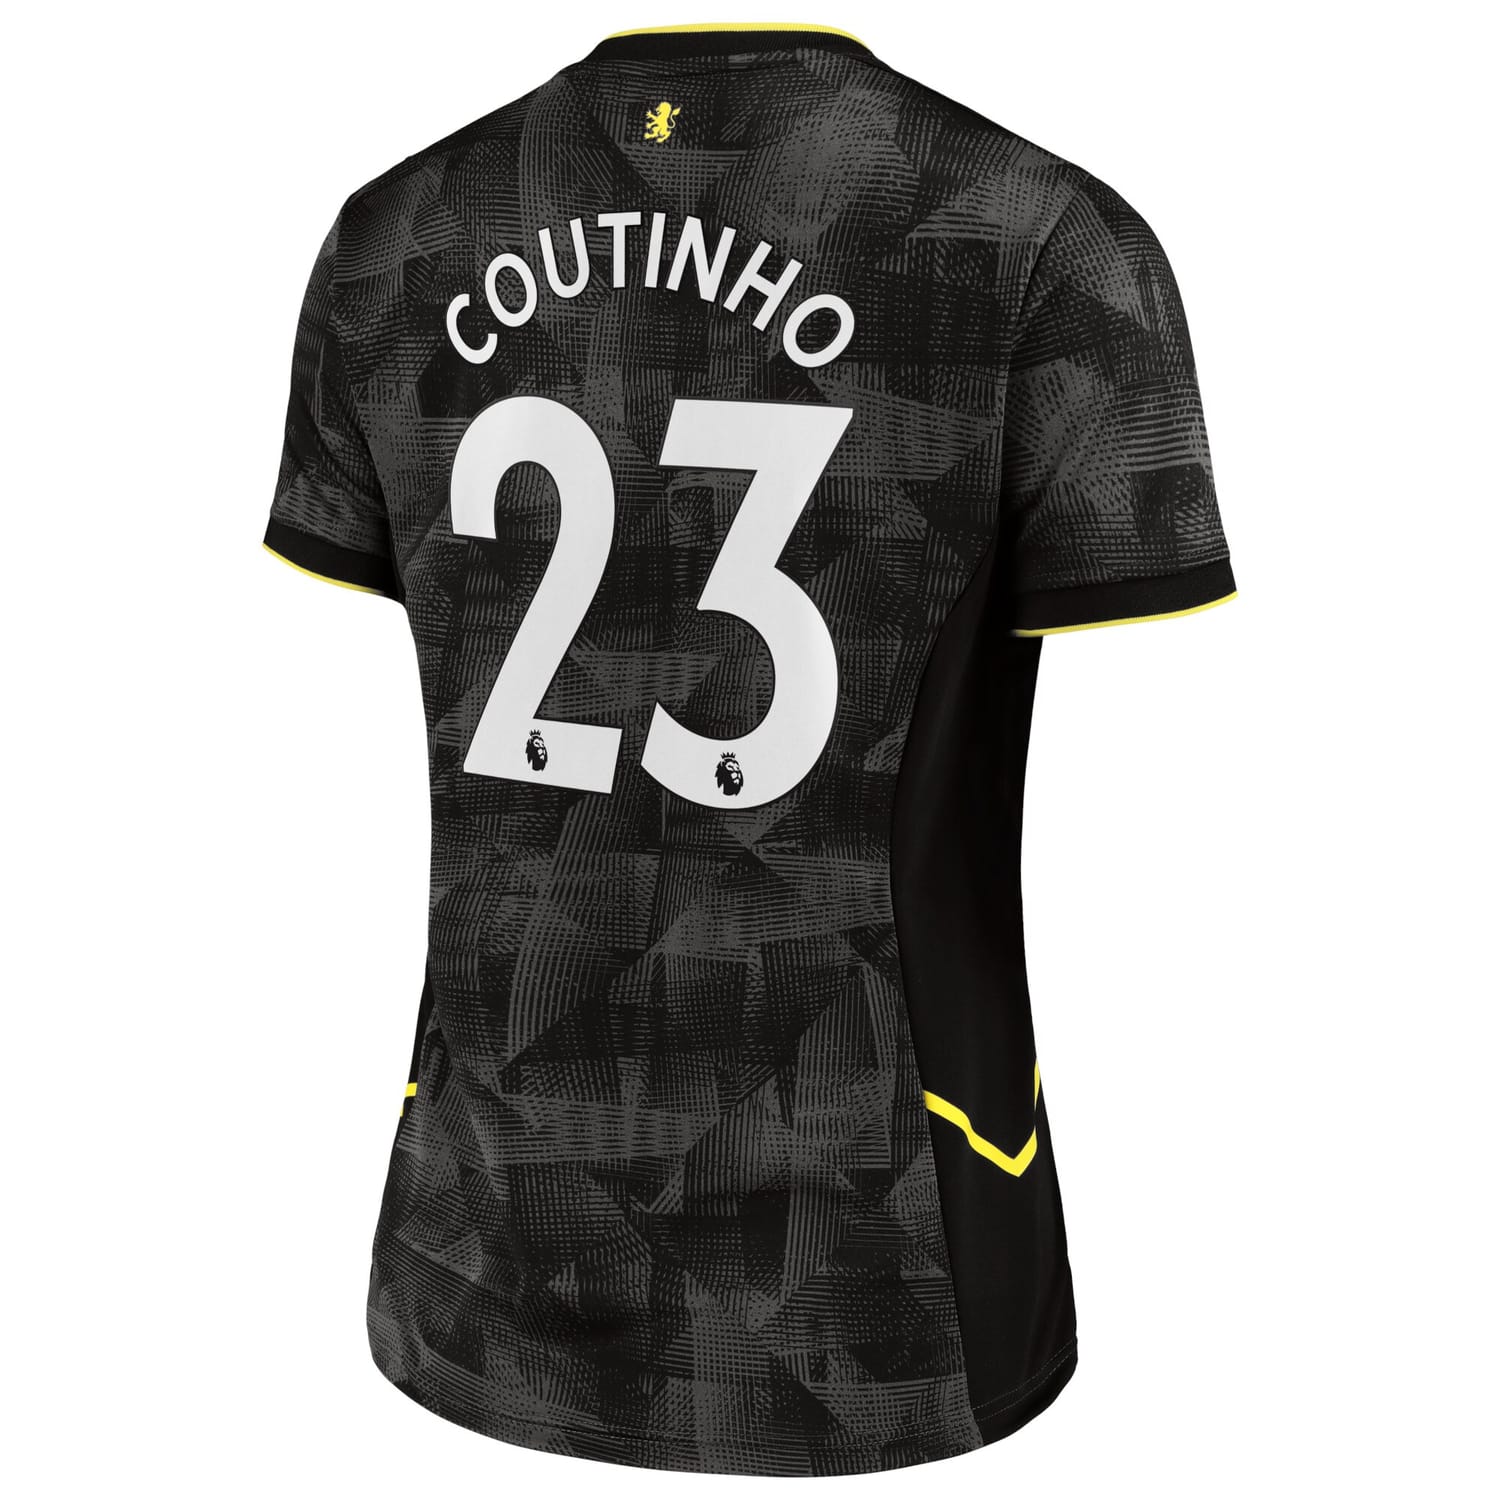 Premier League Ast. Villa Third Jersey Shirt 2022-23 player Philippe Coutinho 23 printing for Women